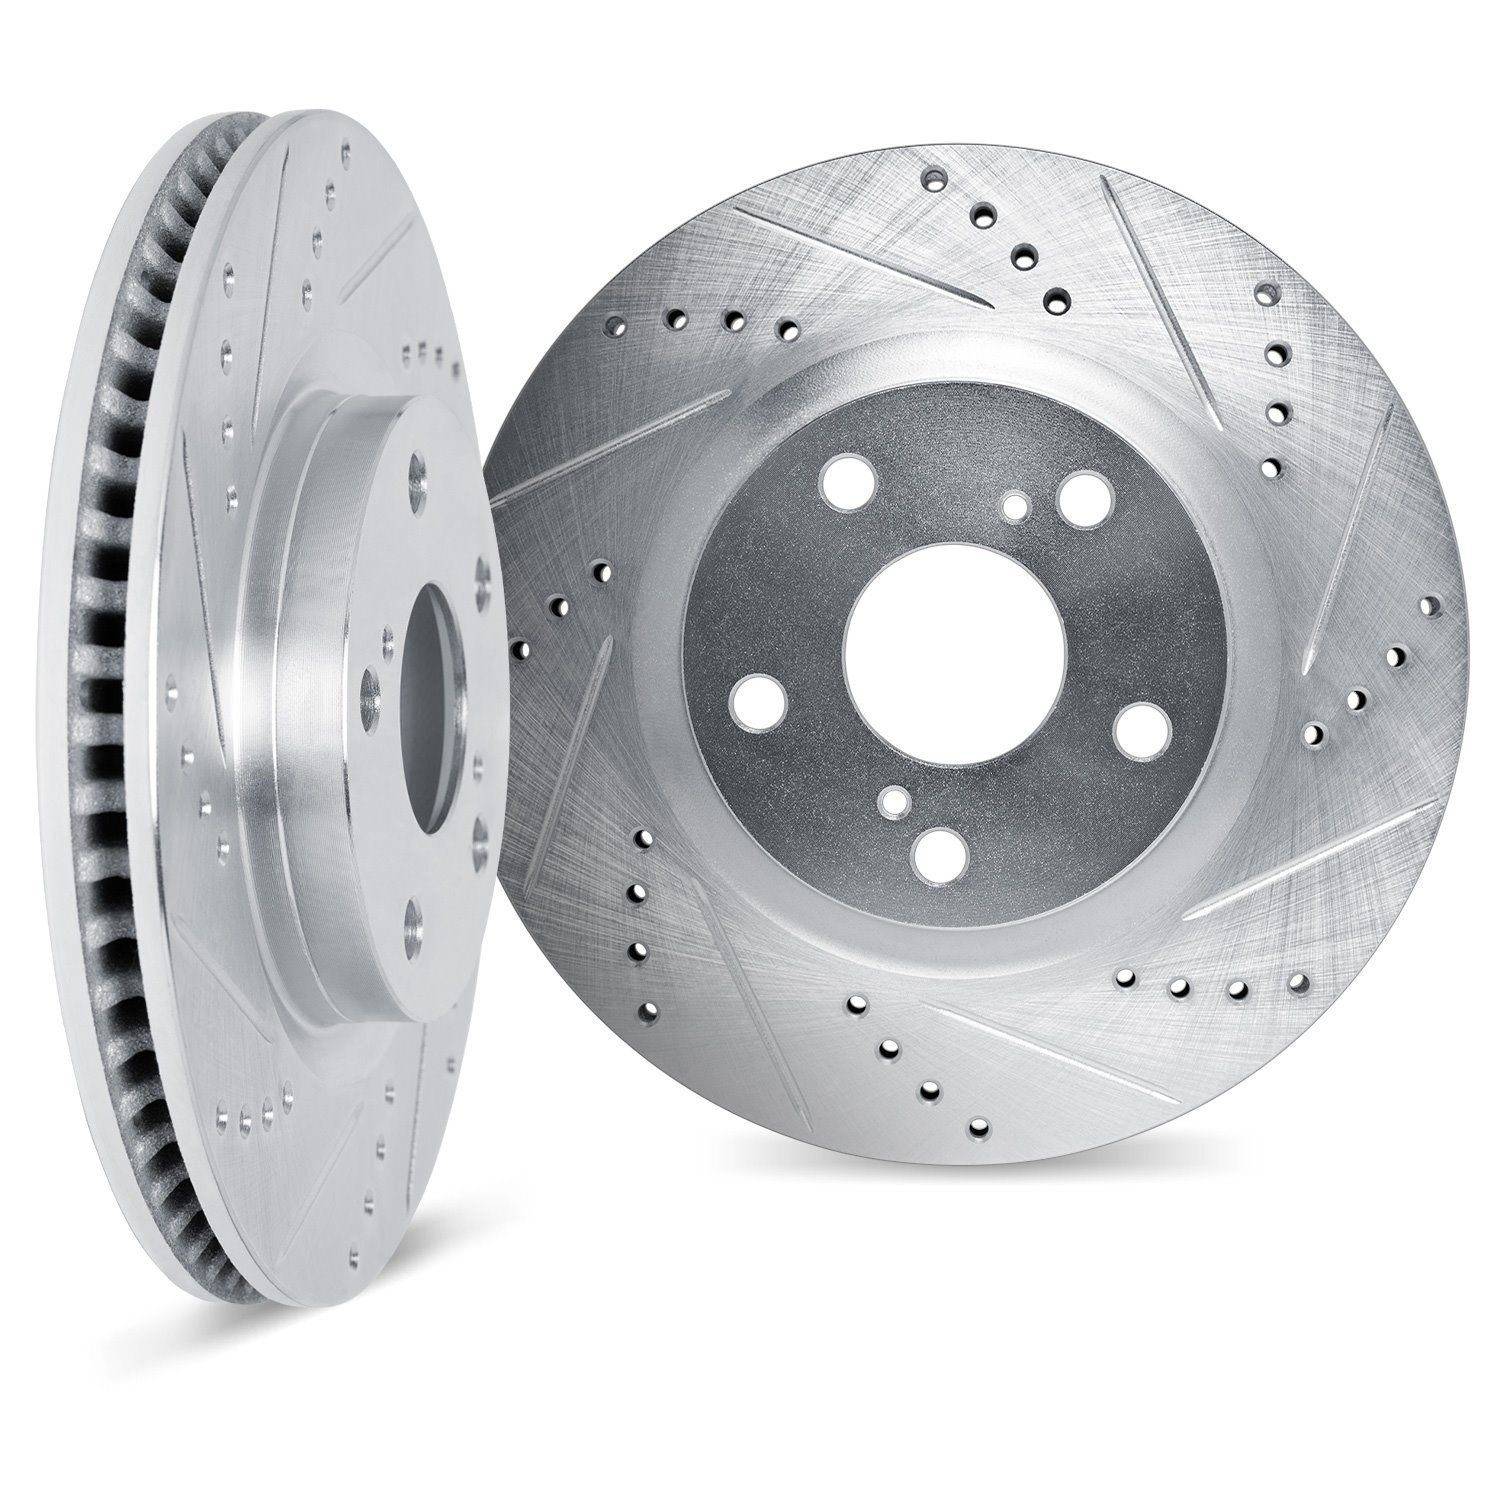 7002-59009 Drilled/Slotted Brake Rotors [Silver], Fits Select Acura/Honda, Position: Front